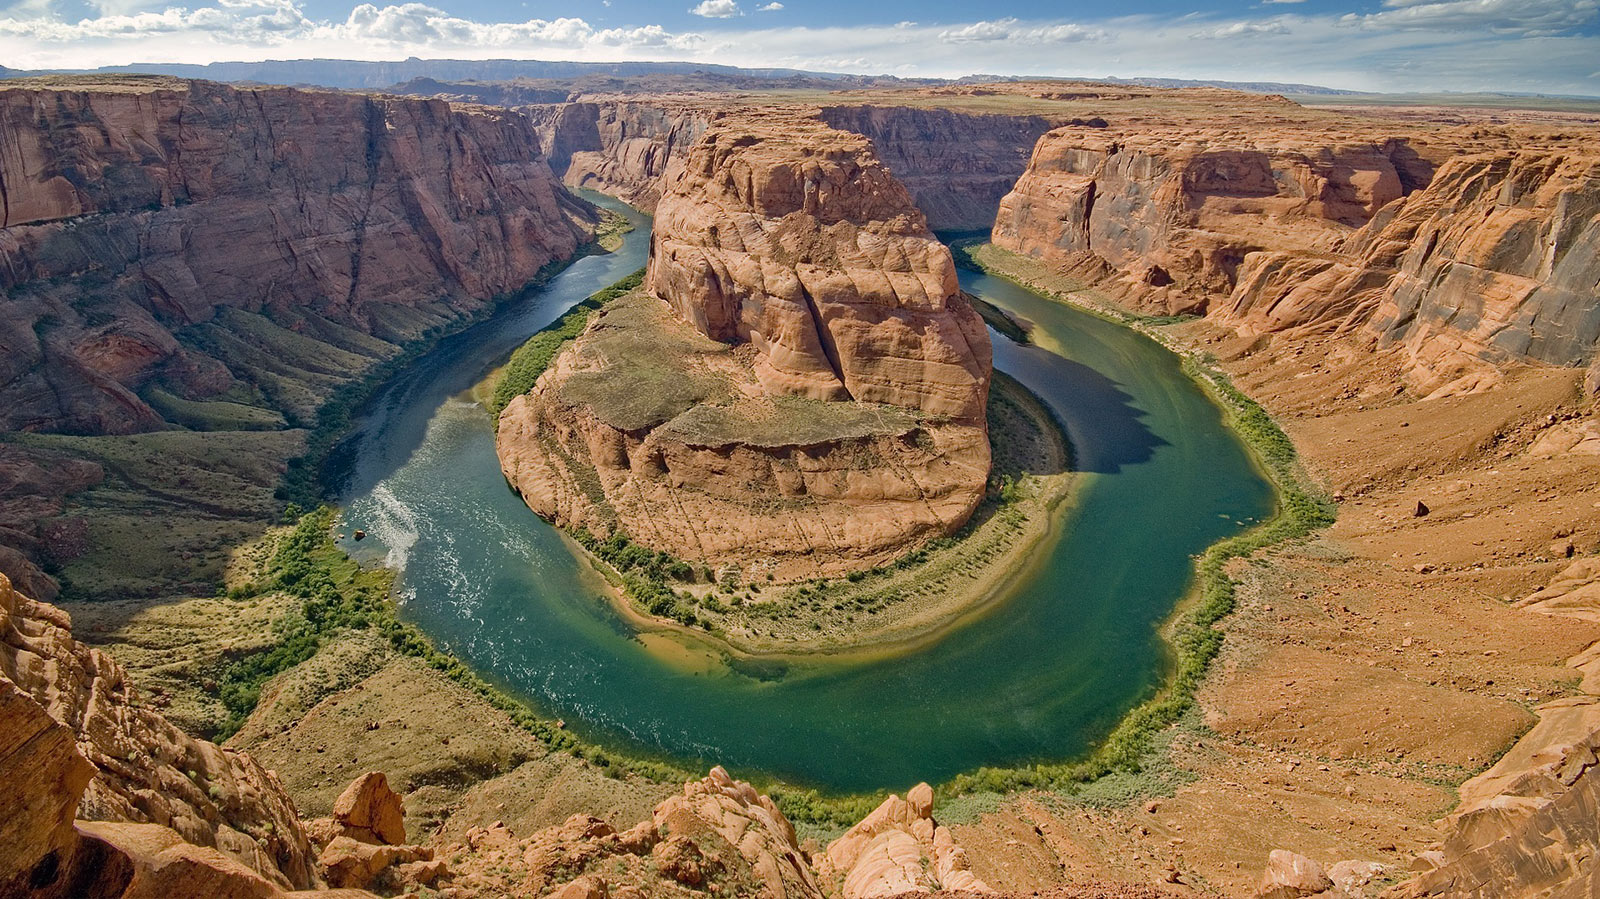 Photo of the Horseshoe Bend on the Colorado River in Utah